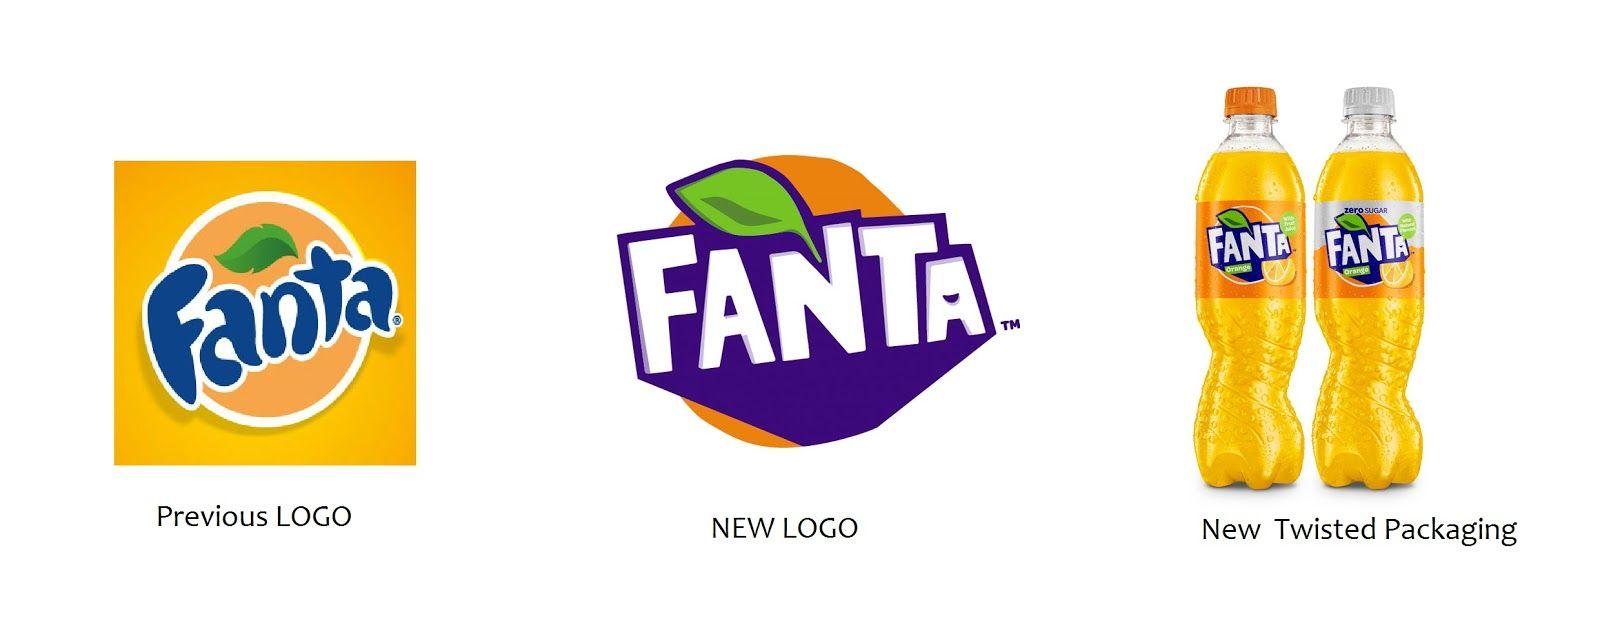 Old Fanta Logo - Fanta gets a New Logo and Twisted Packaging